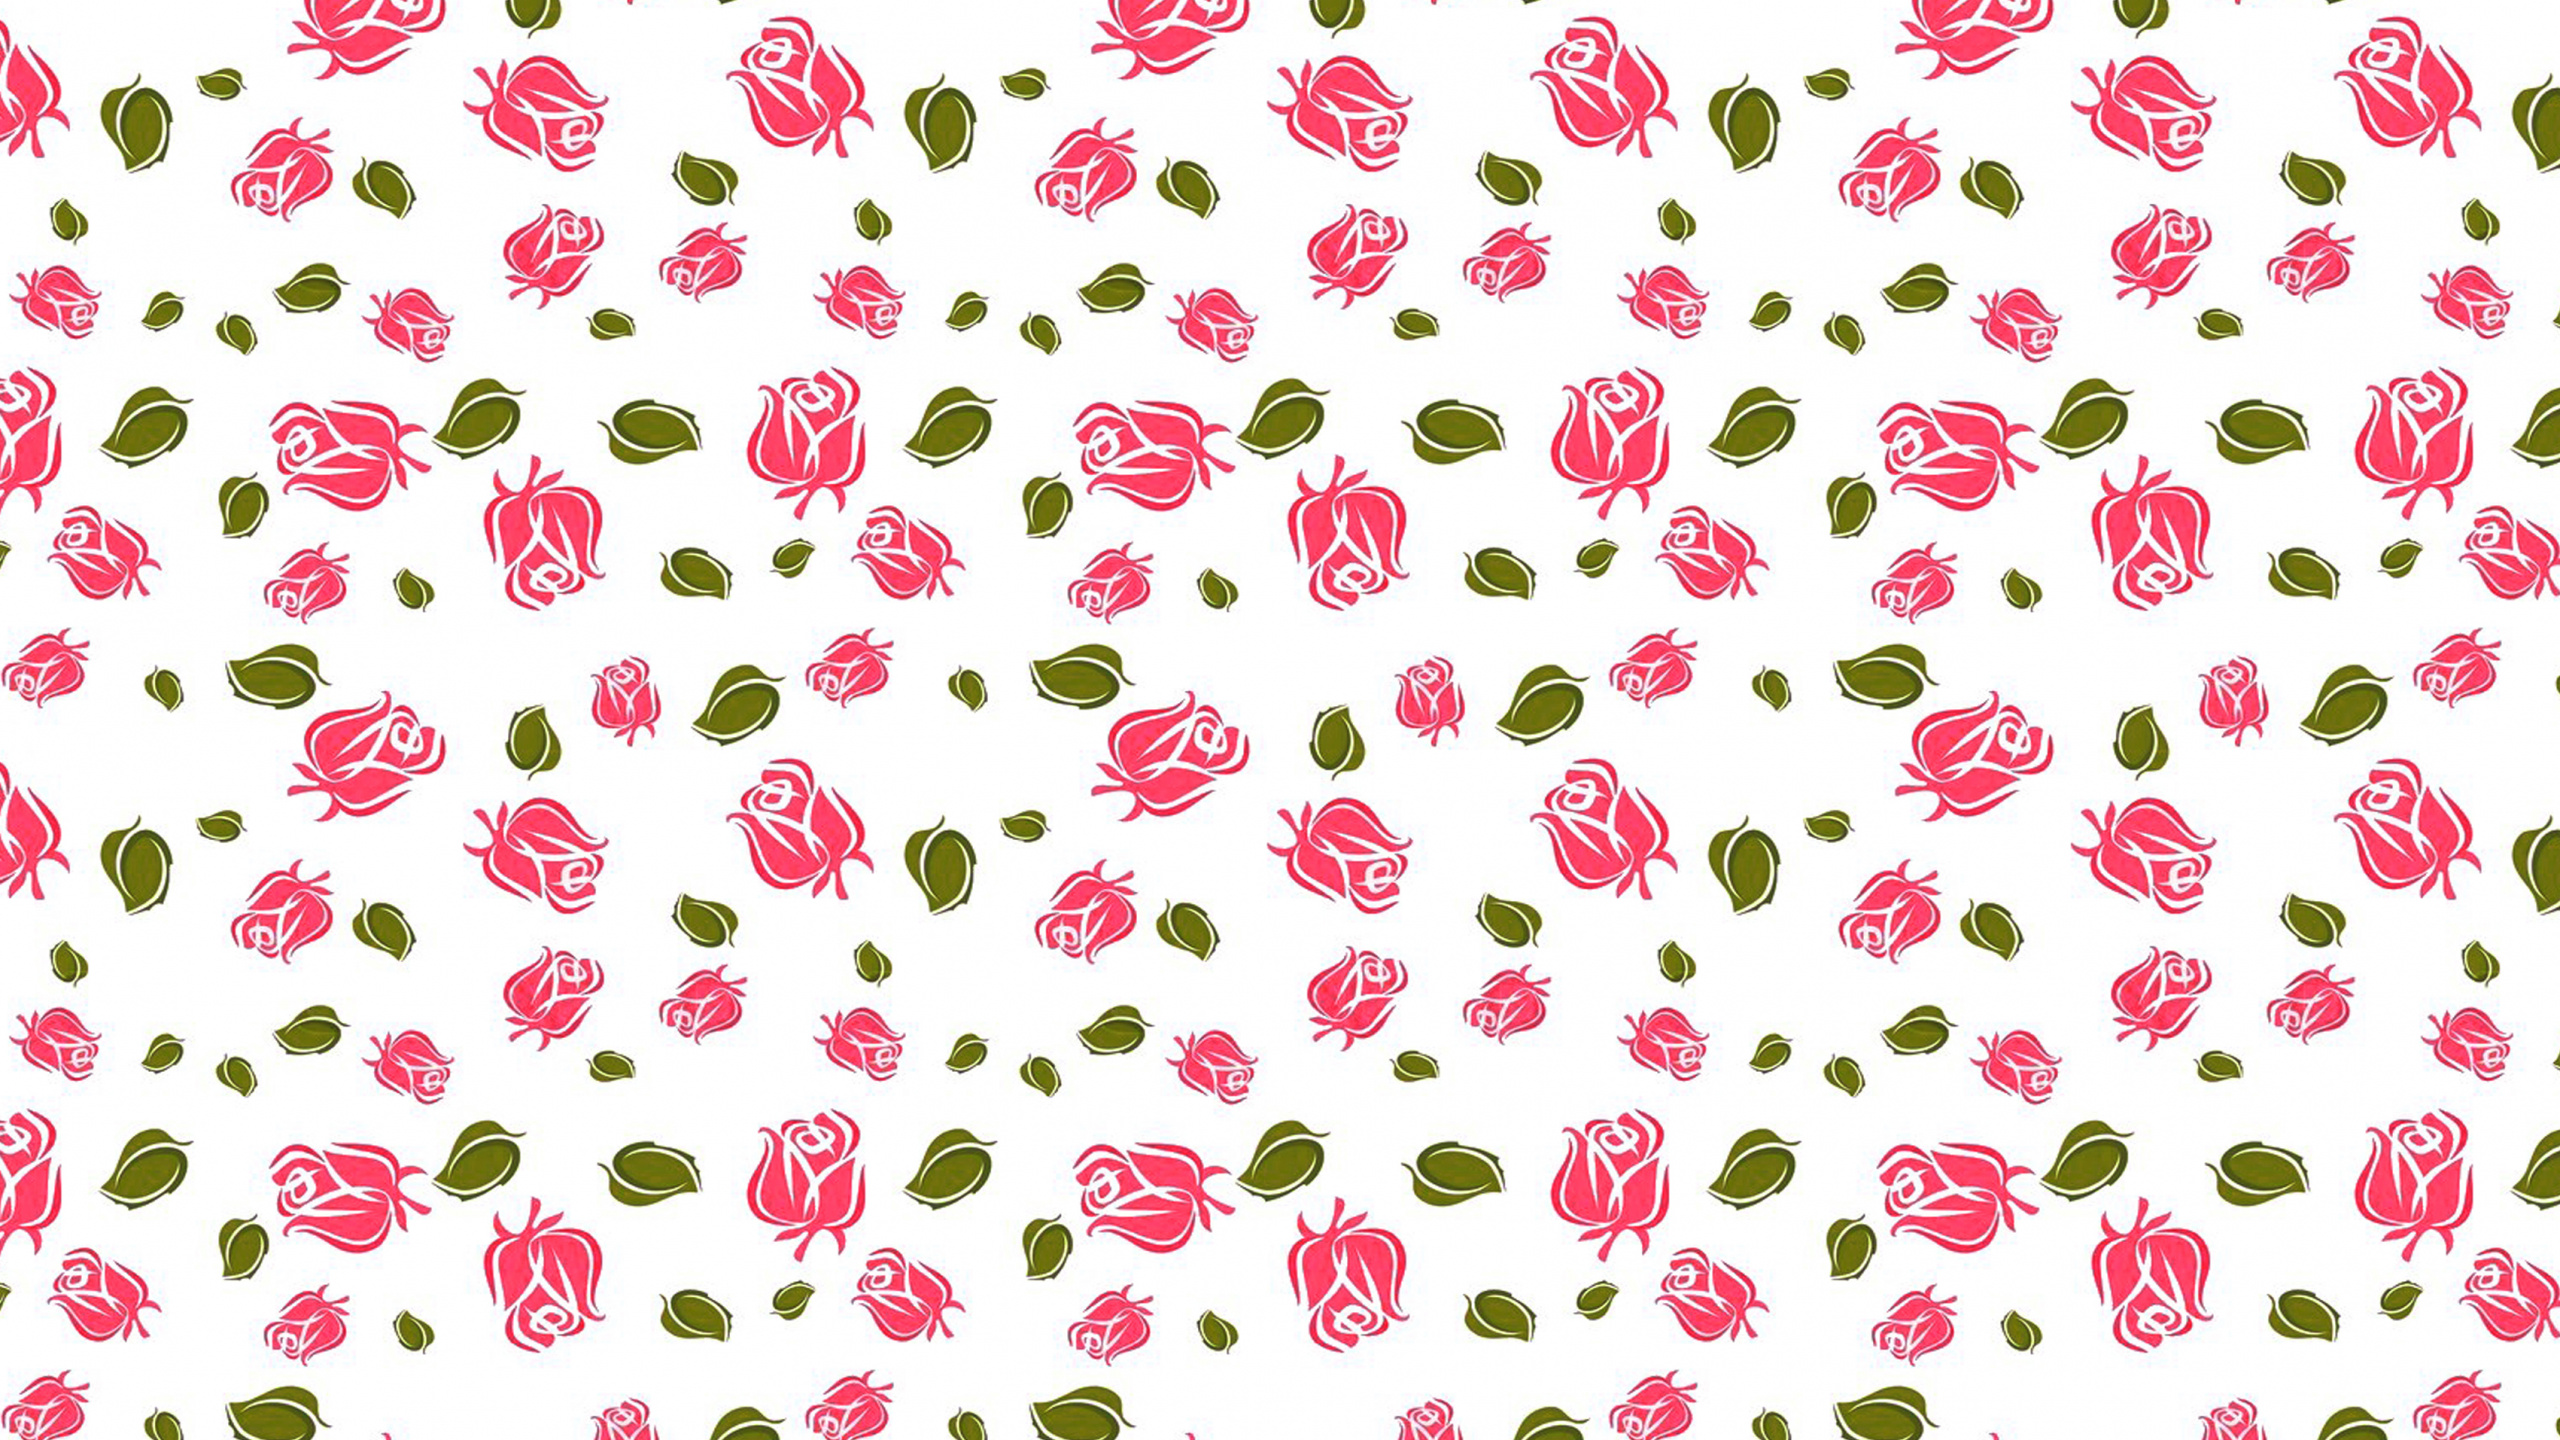 White Pink and Green Hearts and Hearts Illustration. Wallpaper in 2560x1440 Resolution